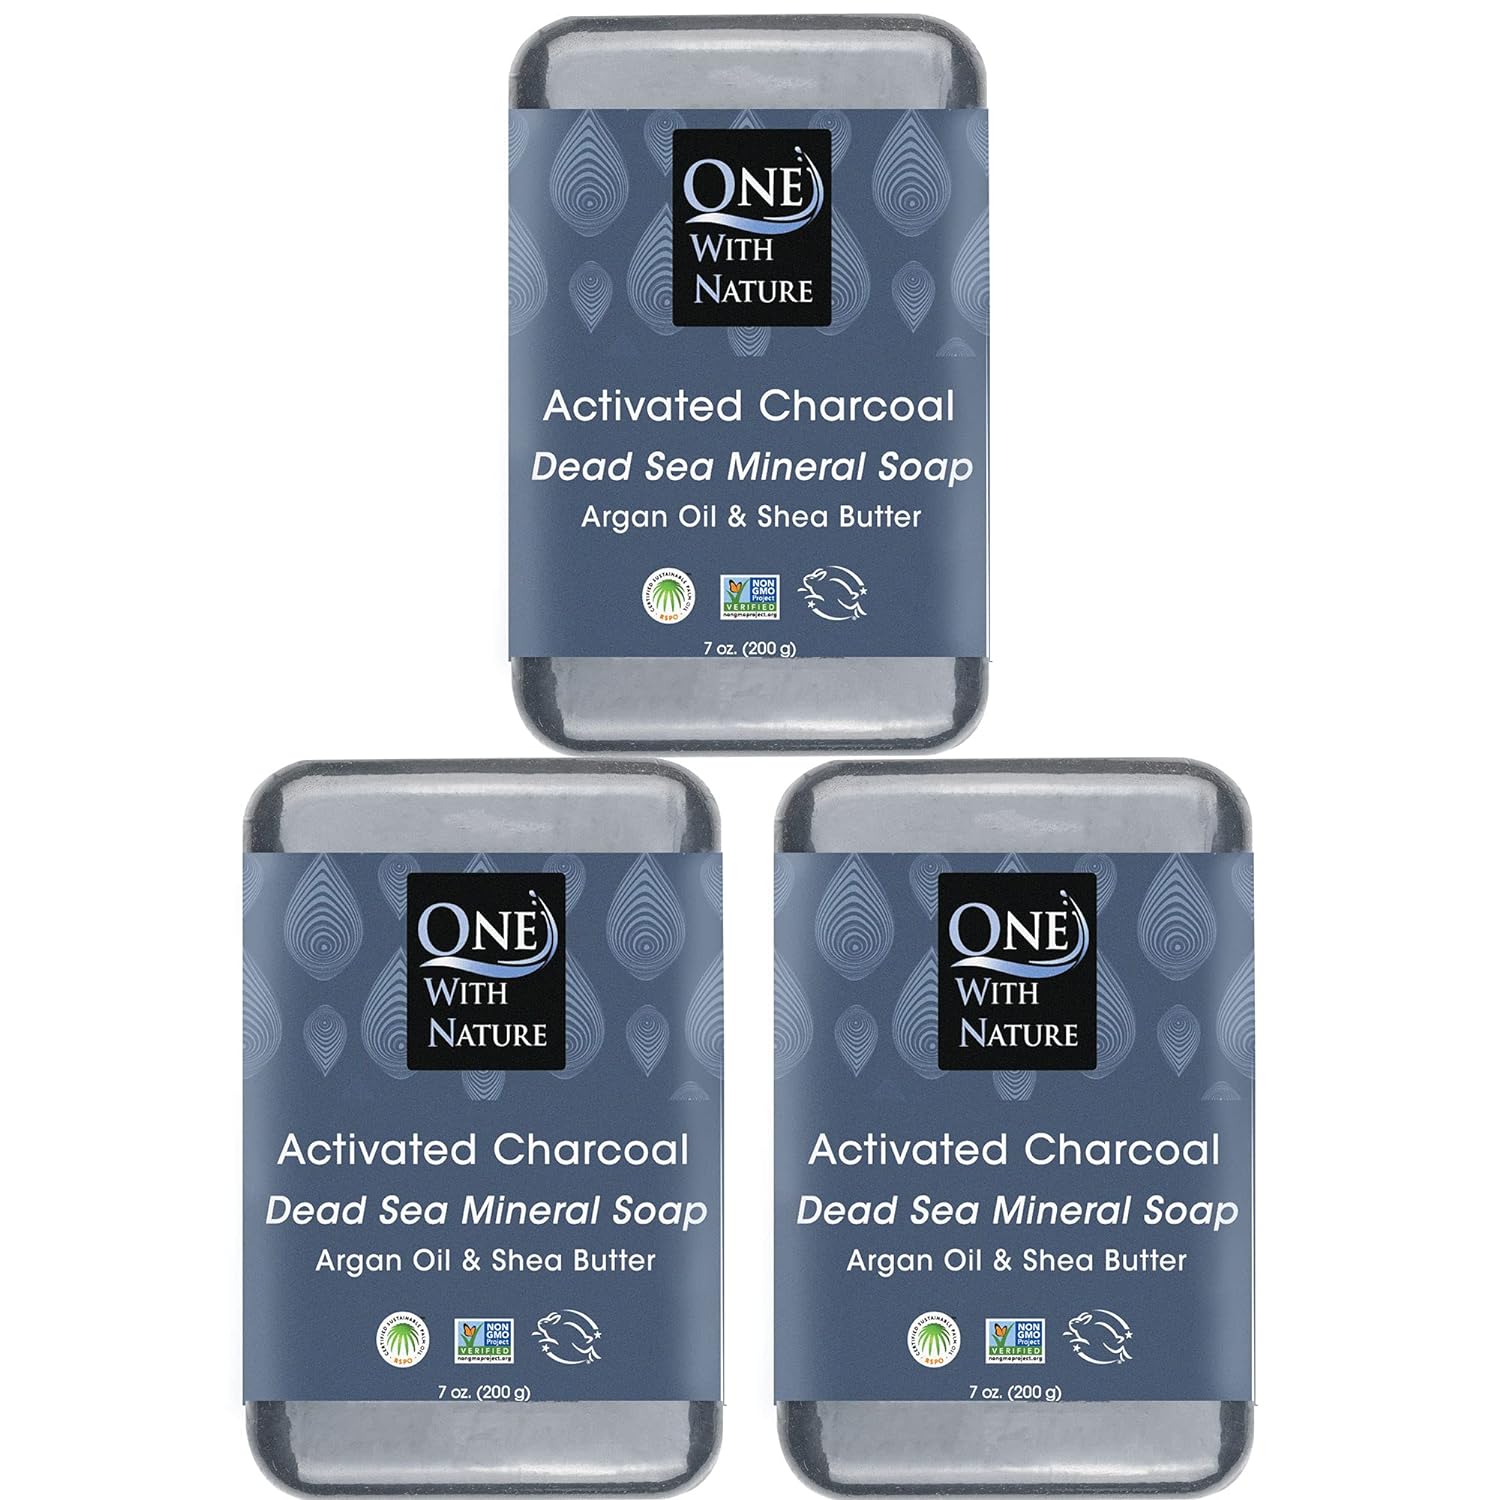 DEAD SEA MINERAL ACTIVATED CHARCOAL 7  SOAP 3 pk in BRANDED BOX. Dead Sea Salt contains Magnesium, Sulfur & 21 Essential Minerals. Shea Butter, Argan Oil. For all Skin Types, Acne, Eczema, Psoriasis